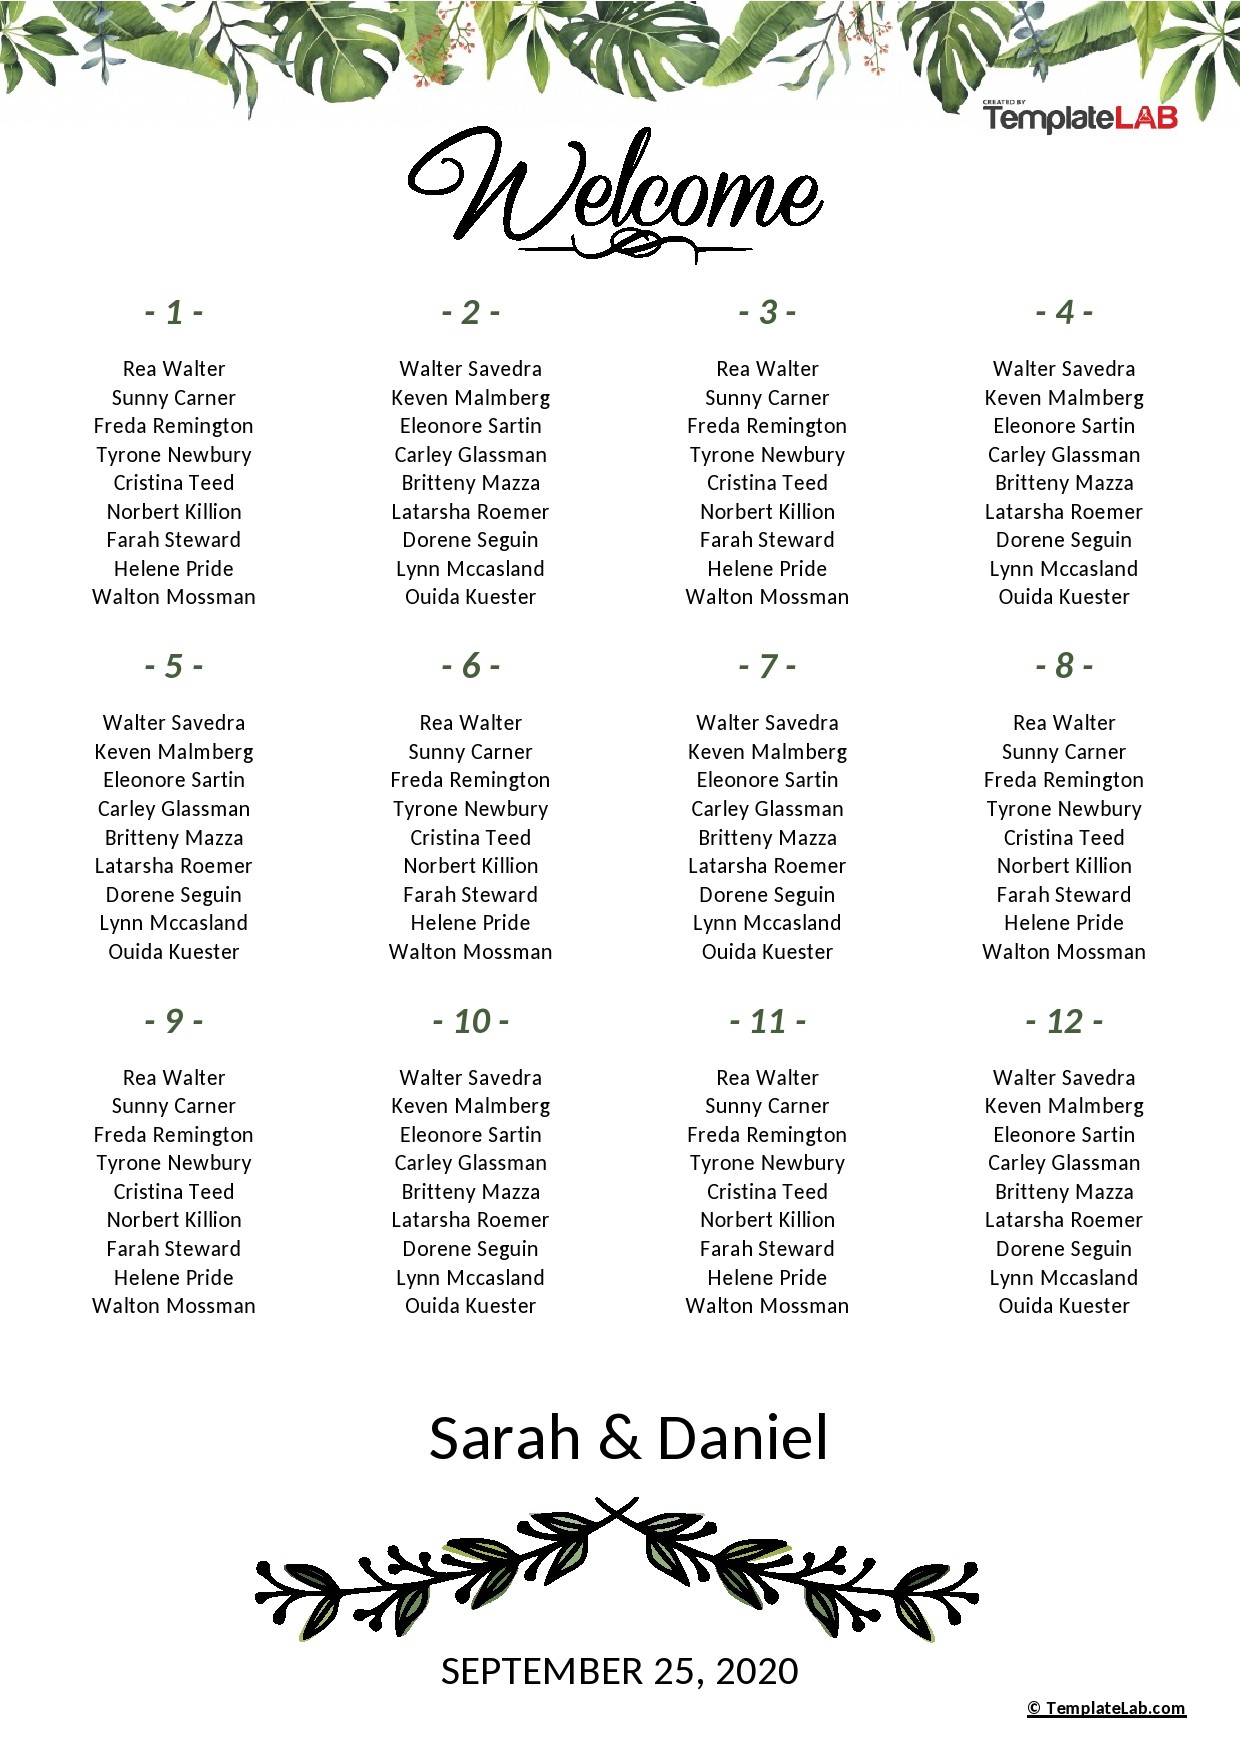 40-great-seating-chart-templates-wedding-classroom-more